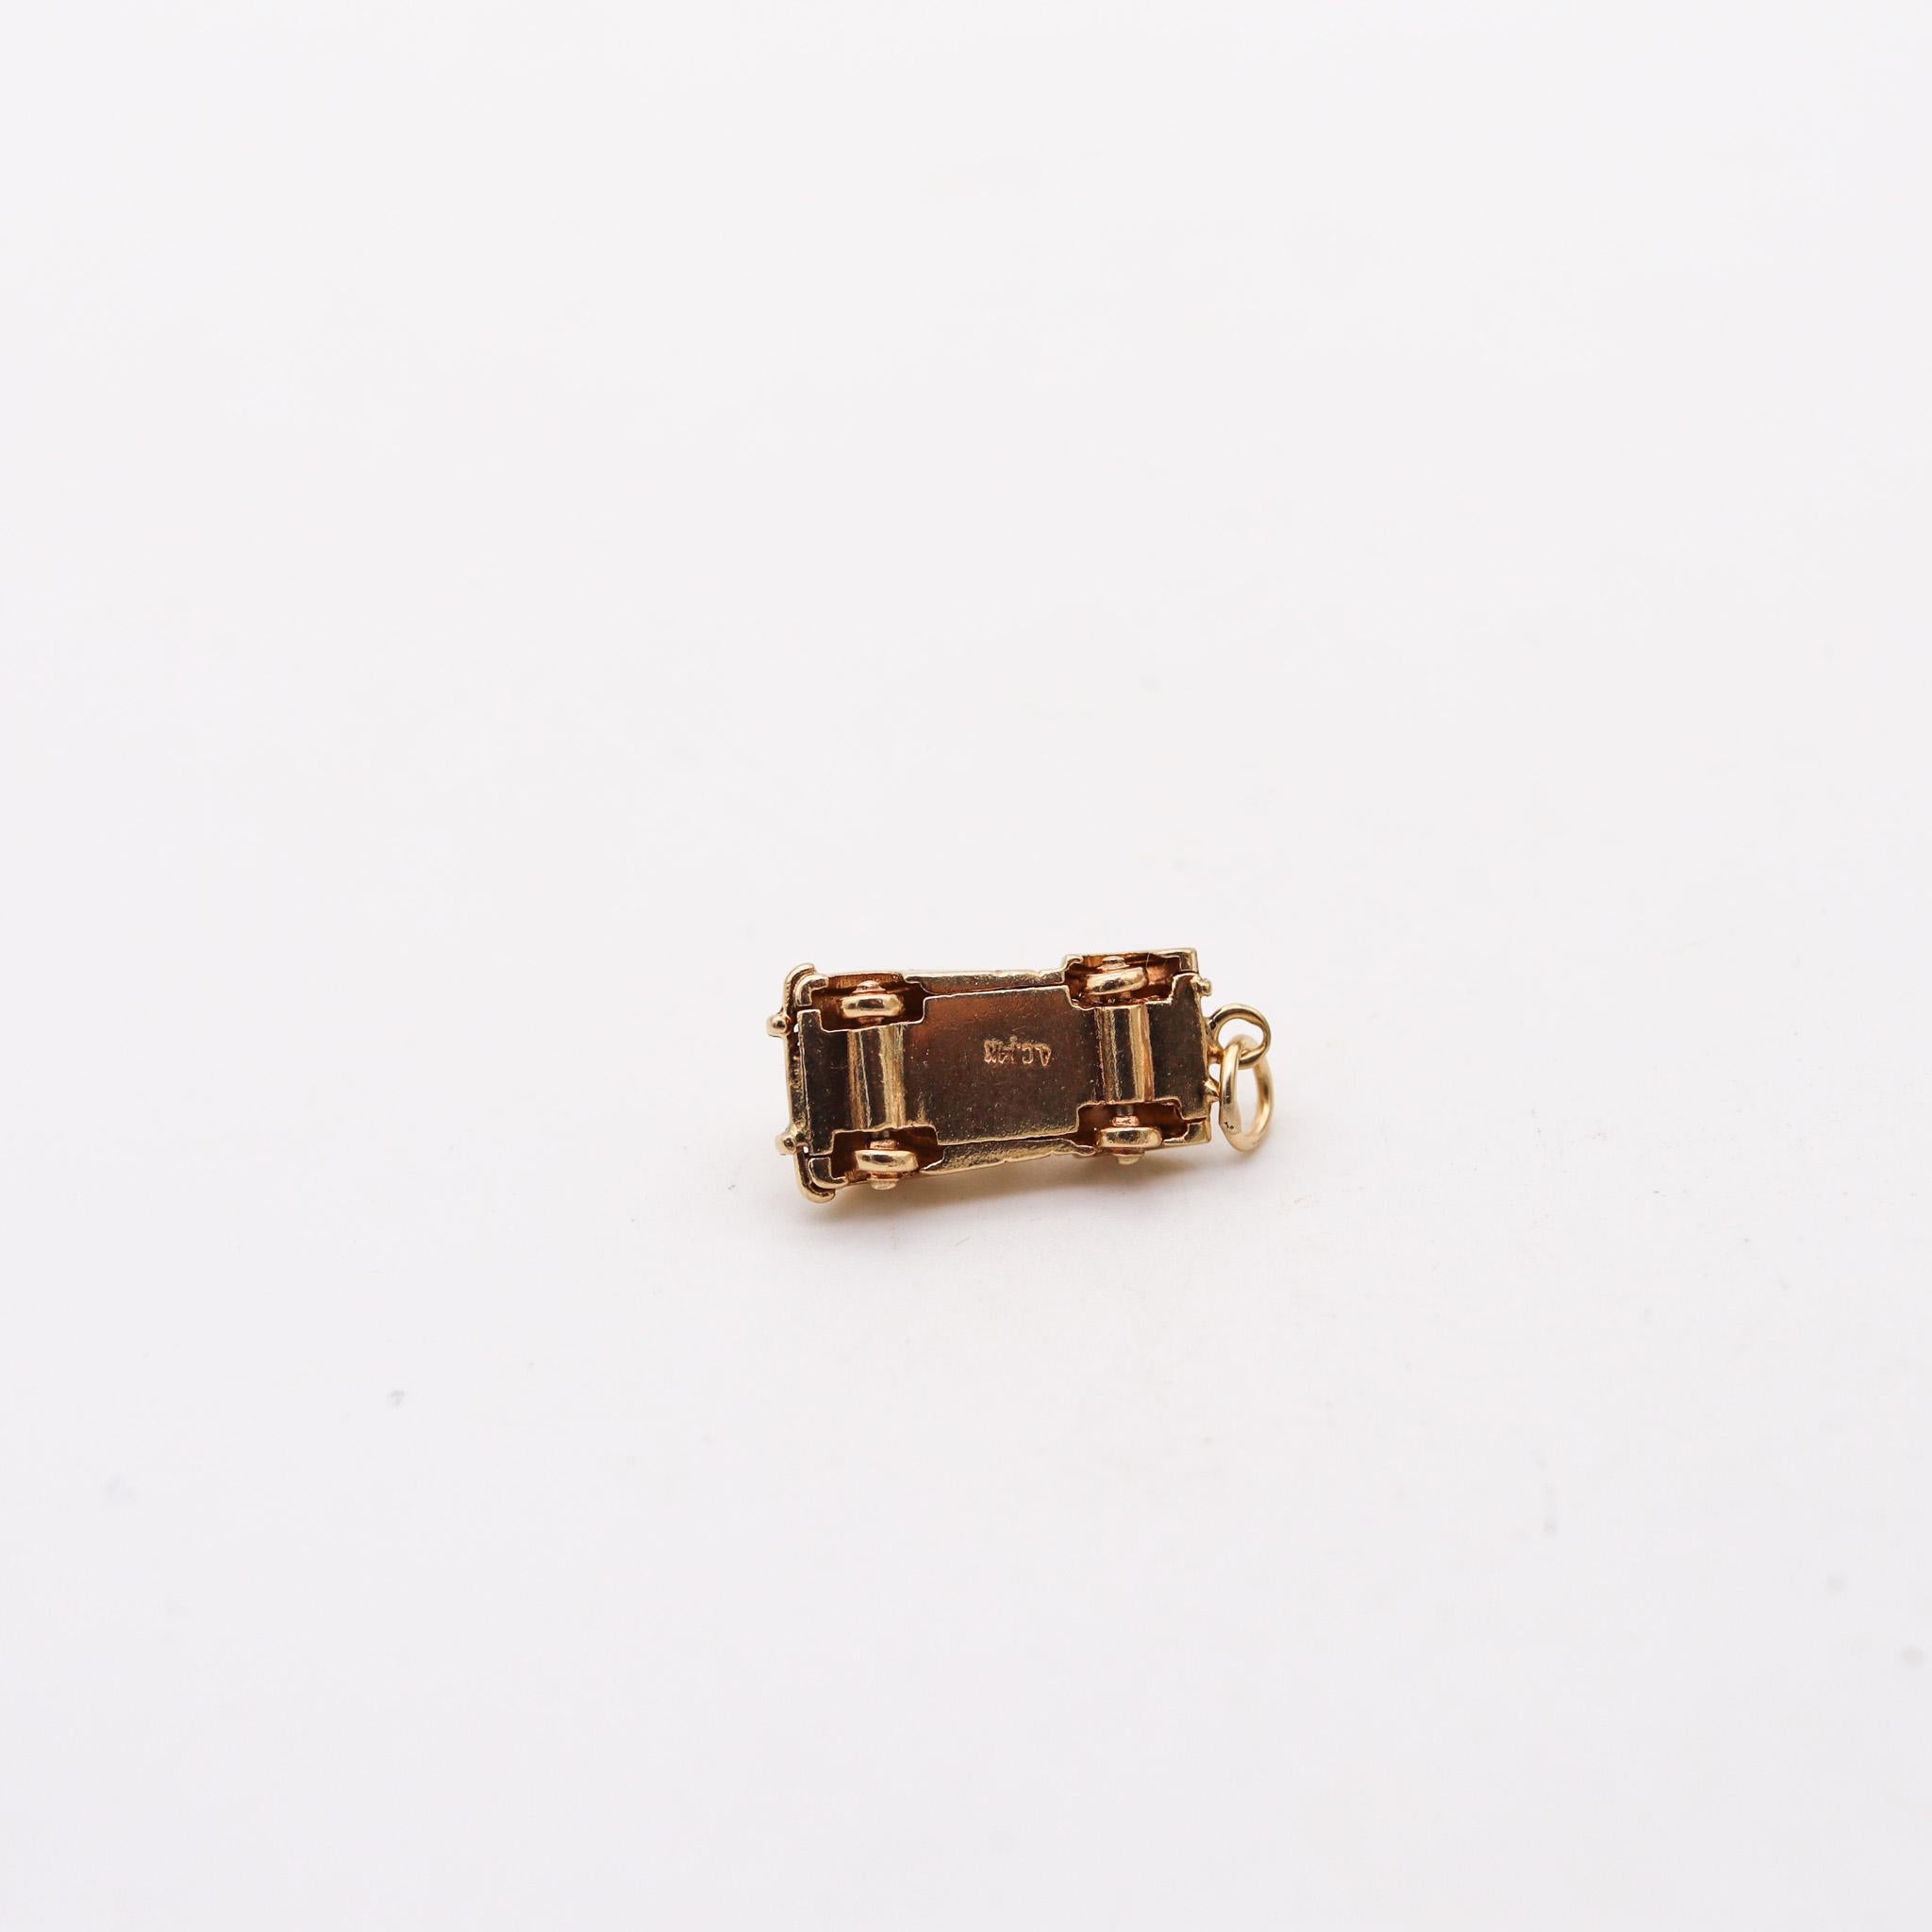 Art Deco 1930 RACING CAR Pendant Charm in Solid 14Kt Yellow Gold For Sale 1